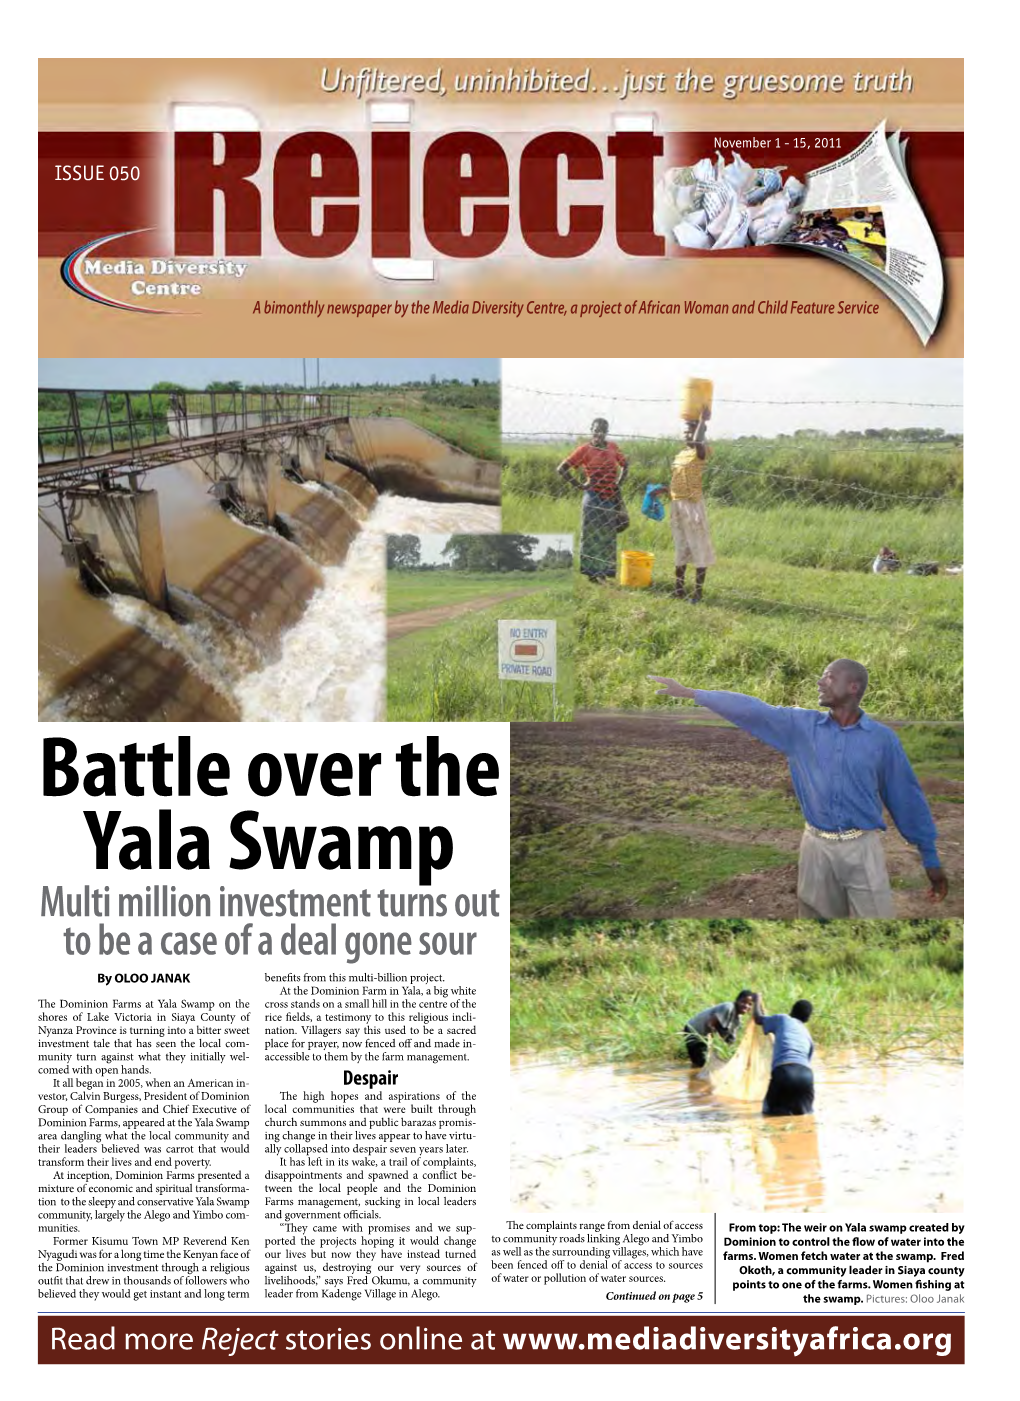 Battle Over the Yala Swamp Multi Million Investment Turns out to Be a Case of a Deal Gone Sour by OLOO JANAK Benefits from This Multi-Billion Project